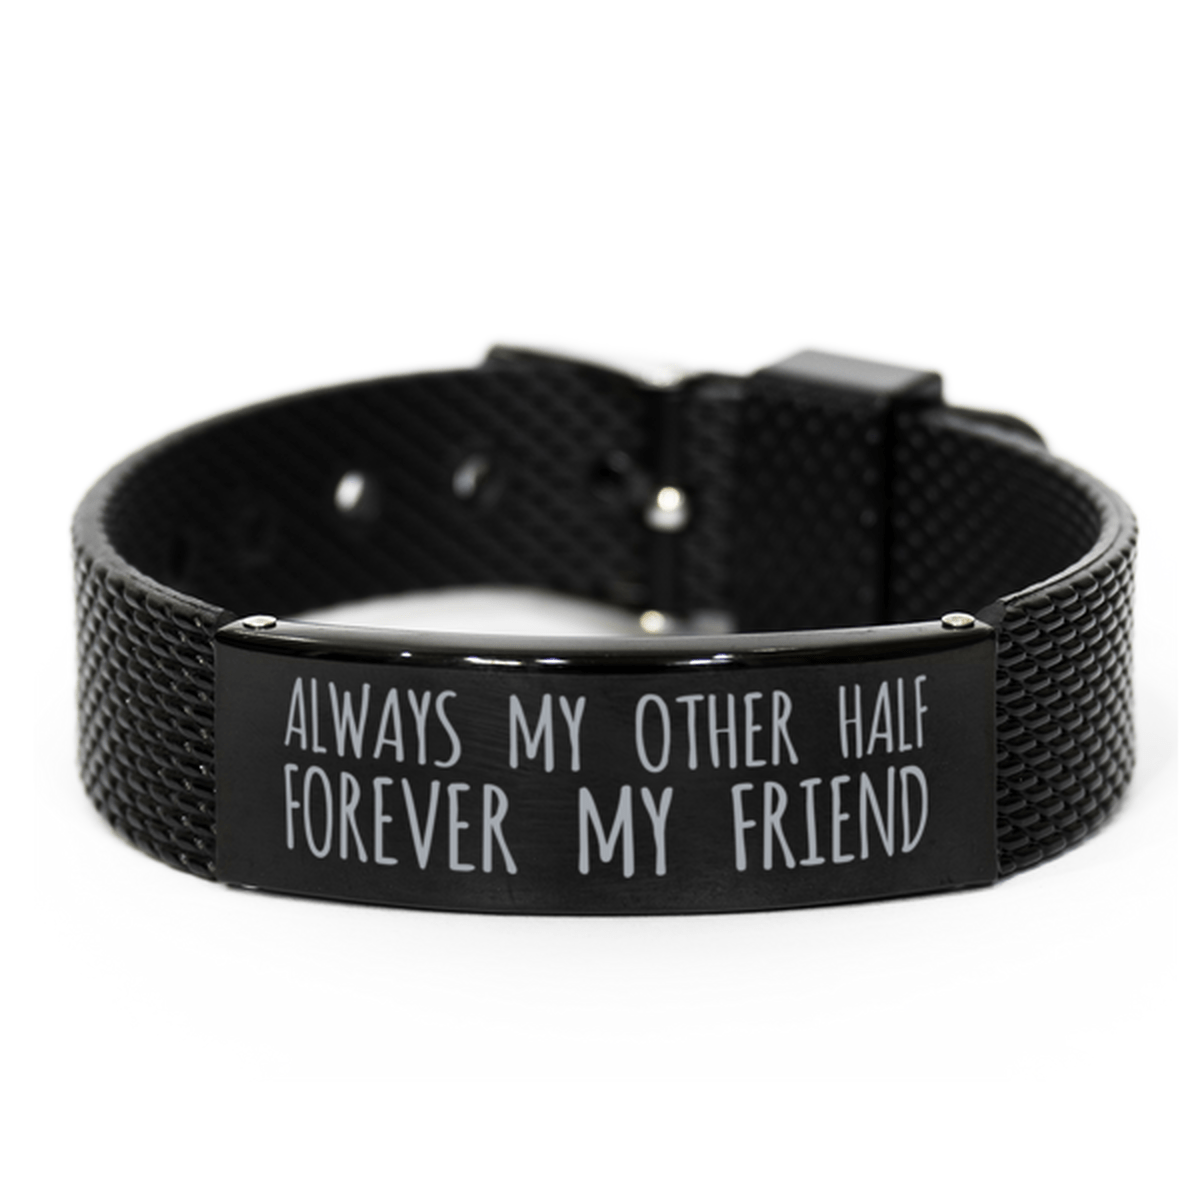 Inspirational Other Half Black Shark Mesh Bracelet, Always My Other Half Forever My Friend, Best Birthday Gifts for Family Friends